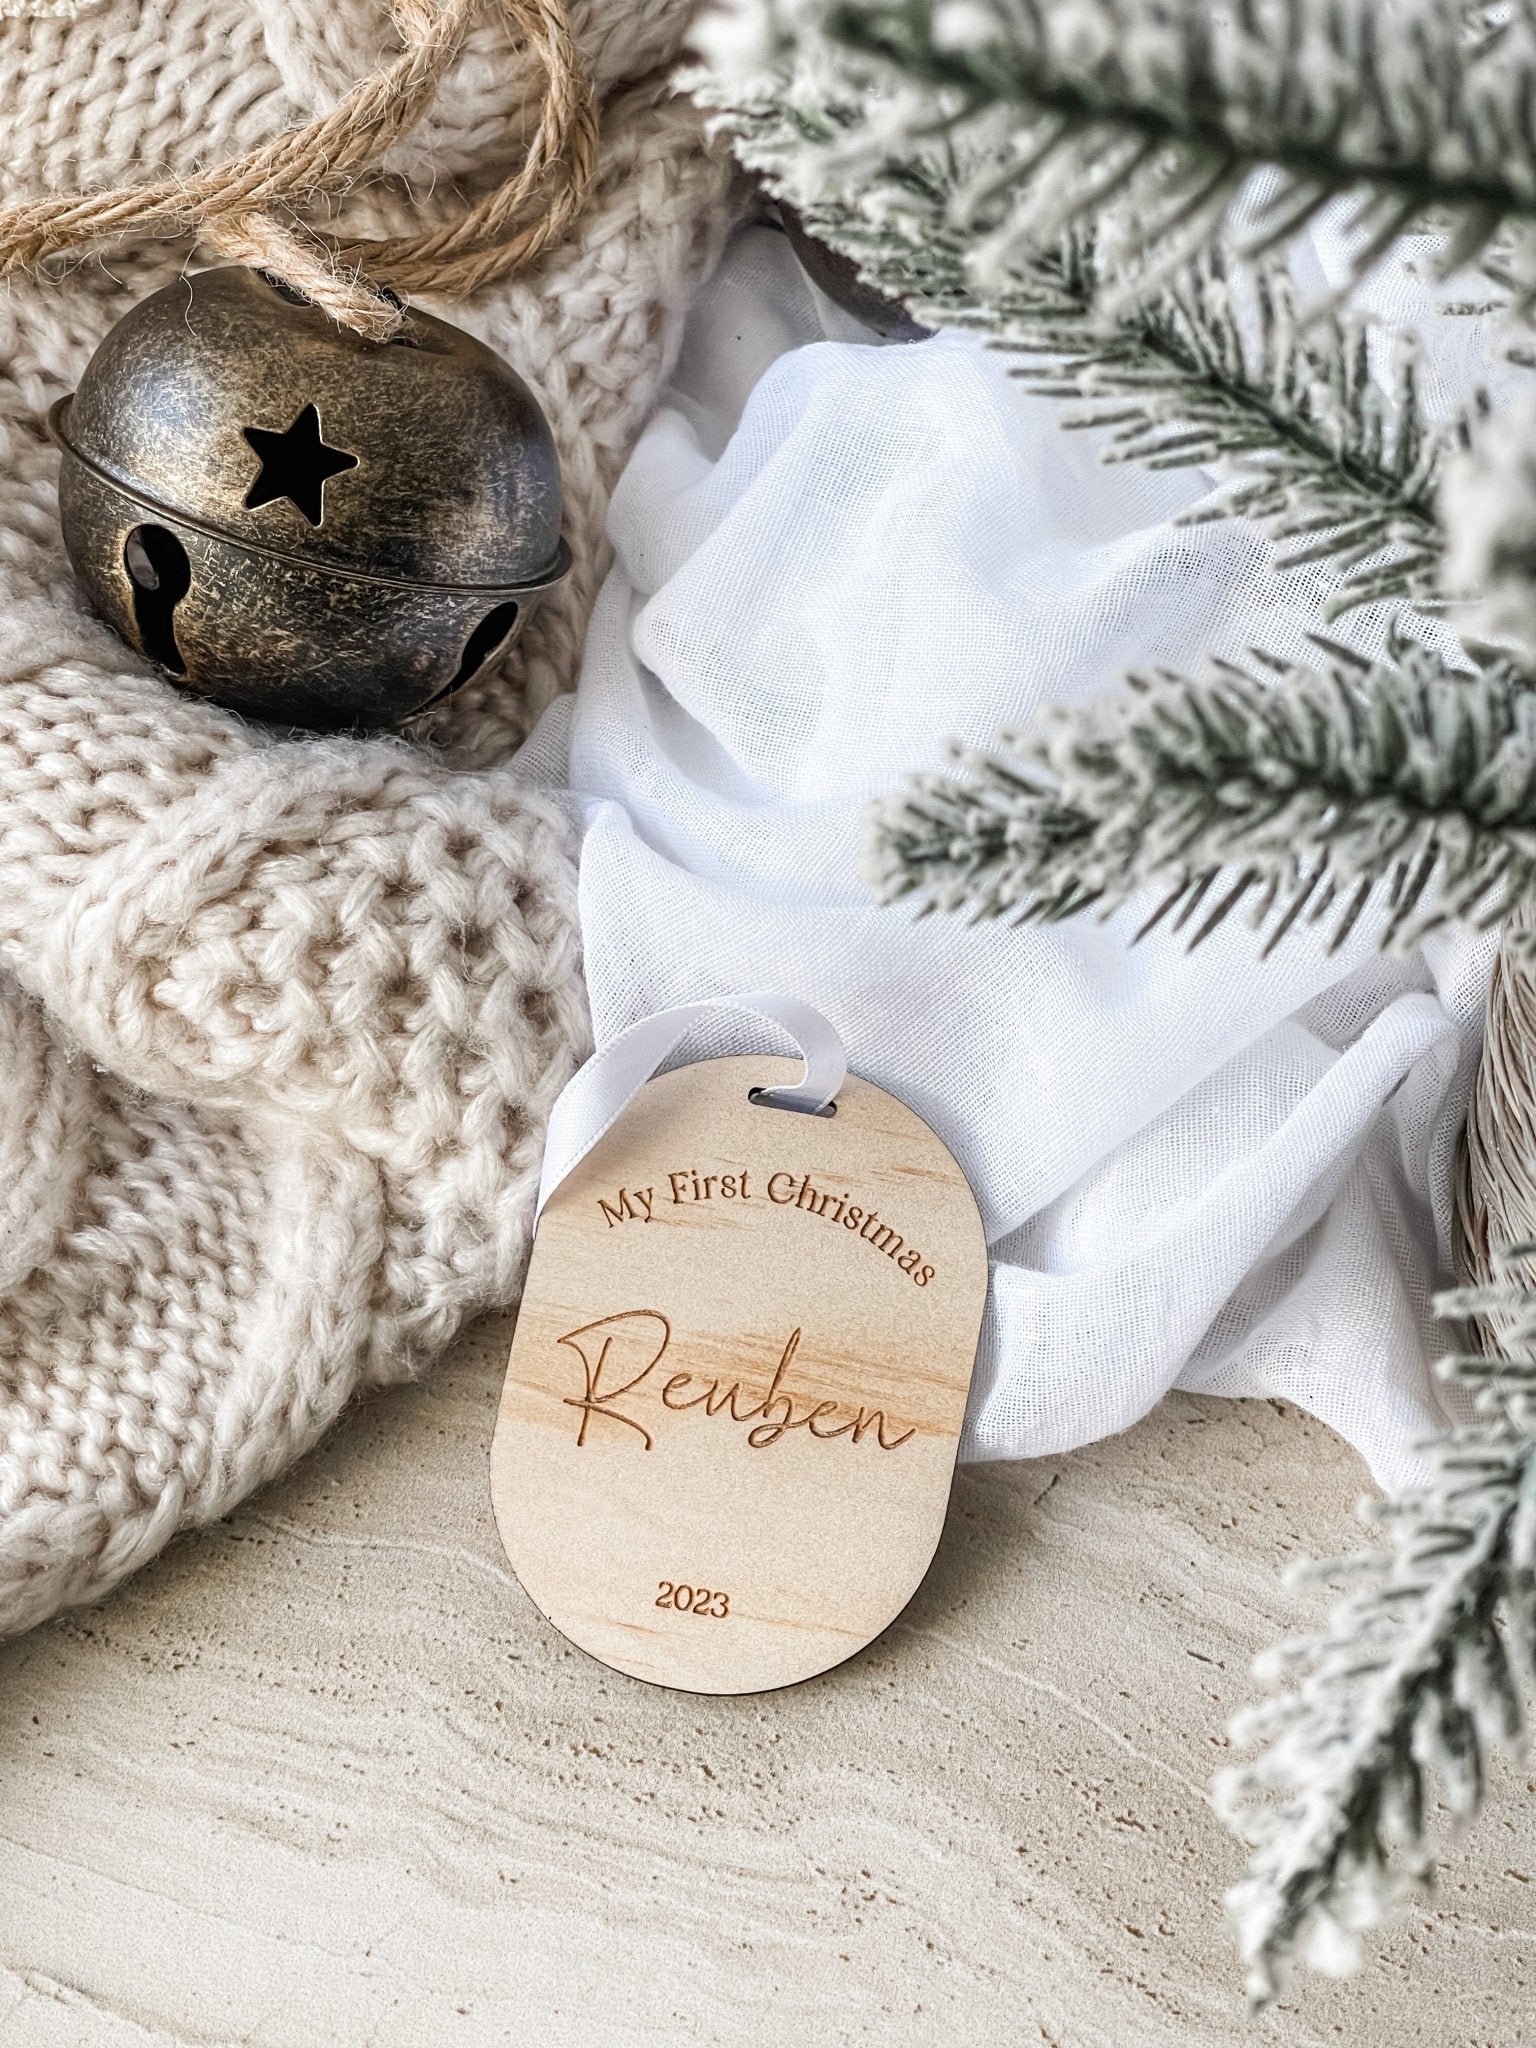 My First Christmas - Engraved Wooden Ornament - The Humble Gift Co.